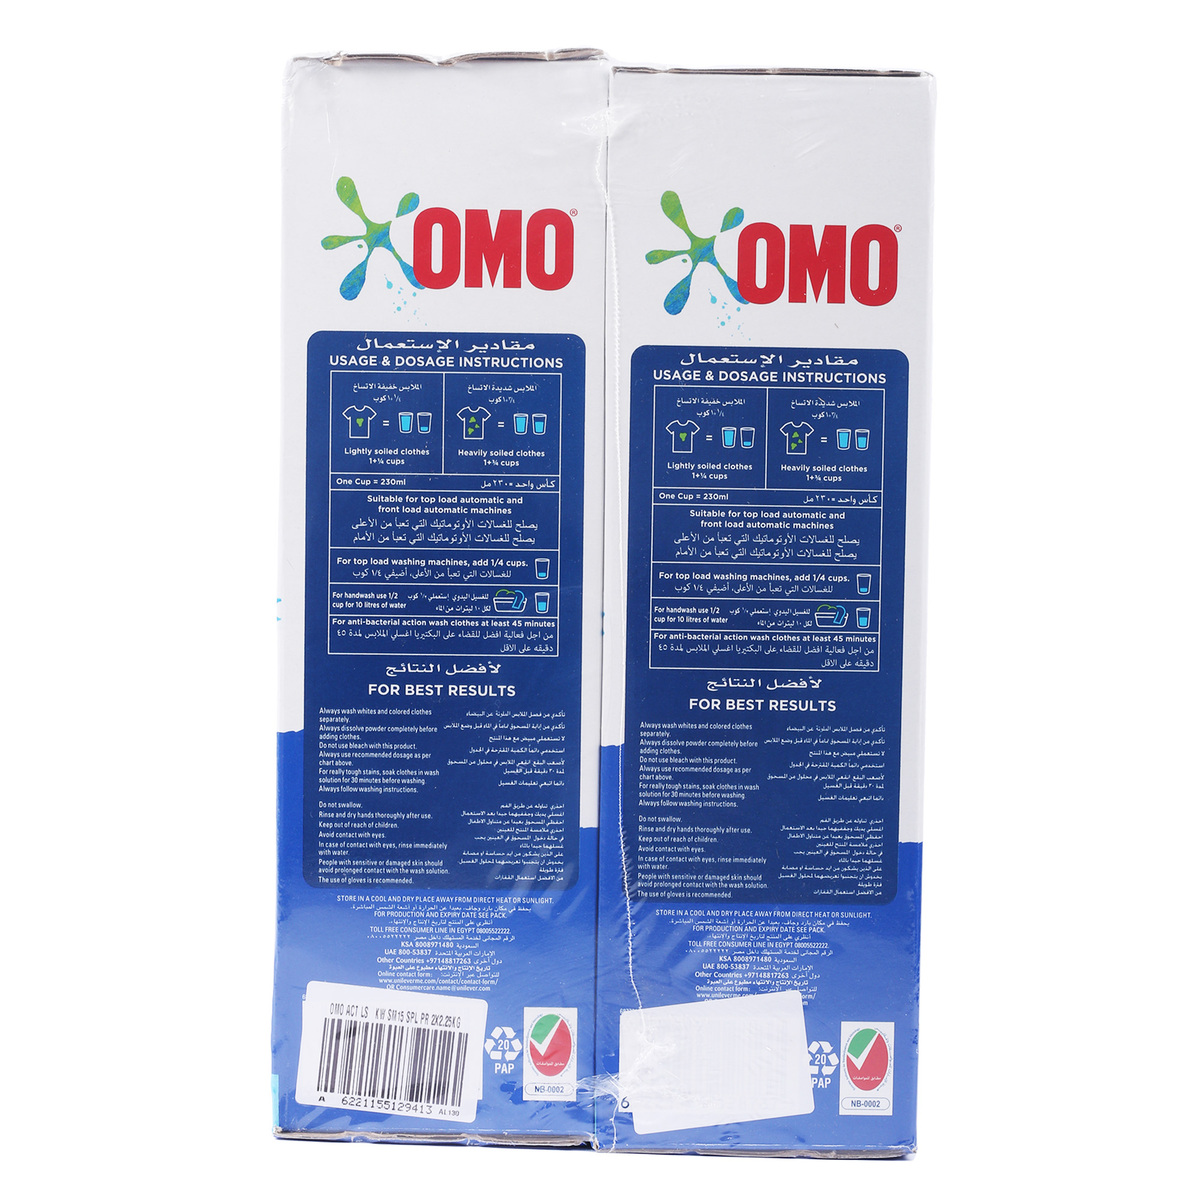 Omo Anti-Bacterial Automatic Washing Powder Value Pack 2 x 2.25 kg